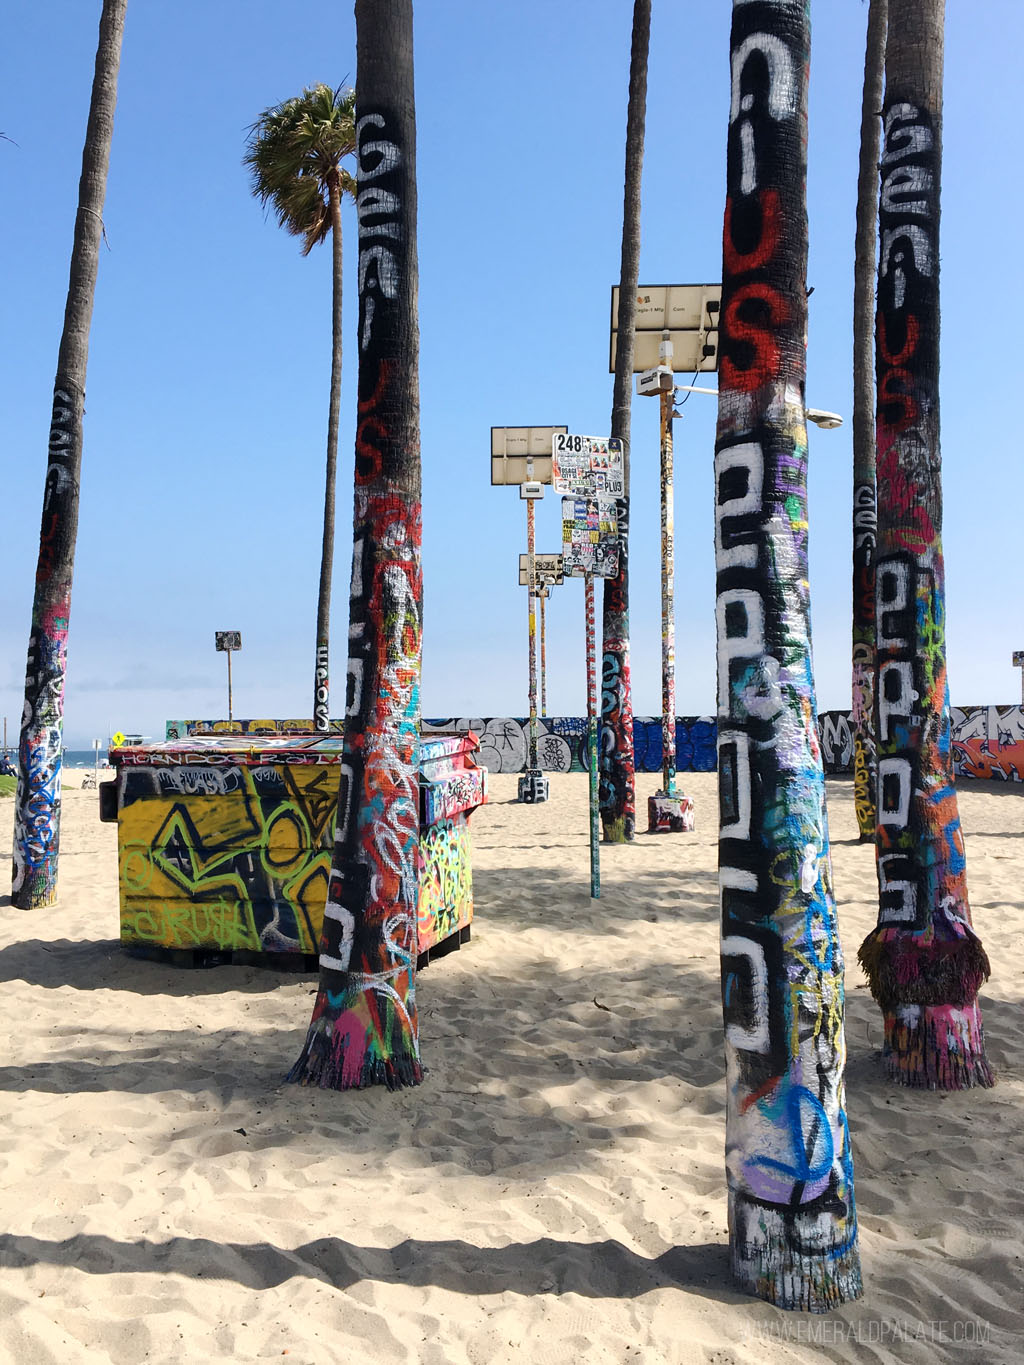 view of Venice Beach and grafitti on palm trees